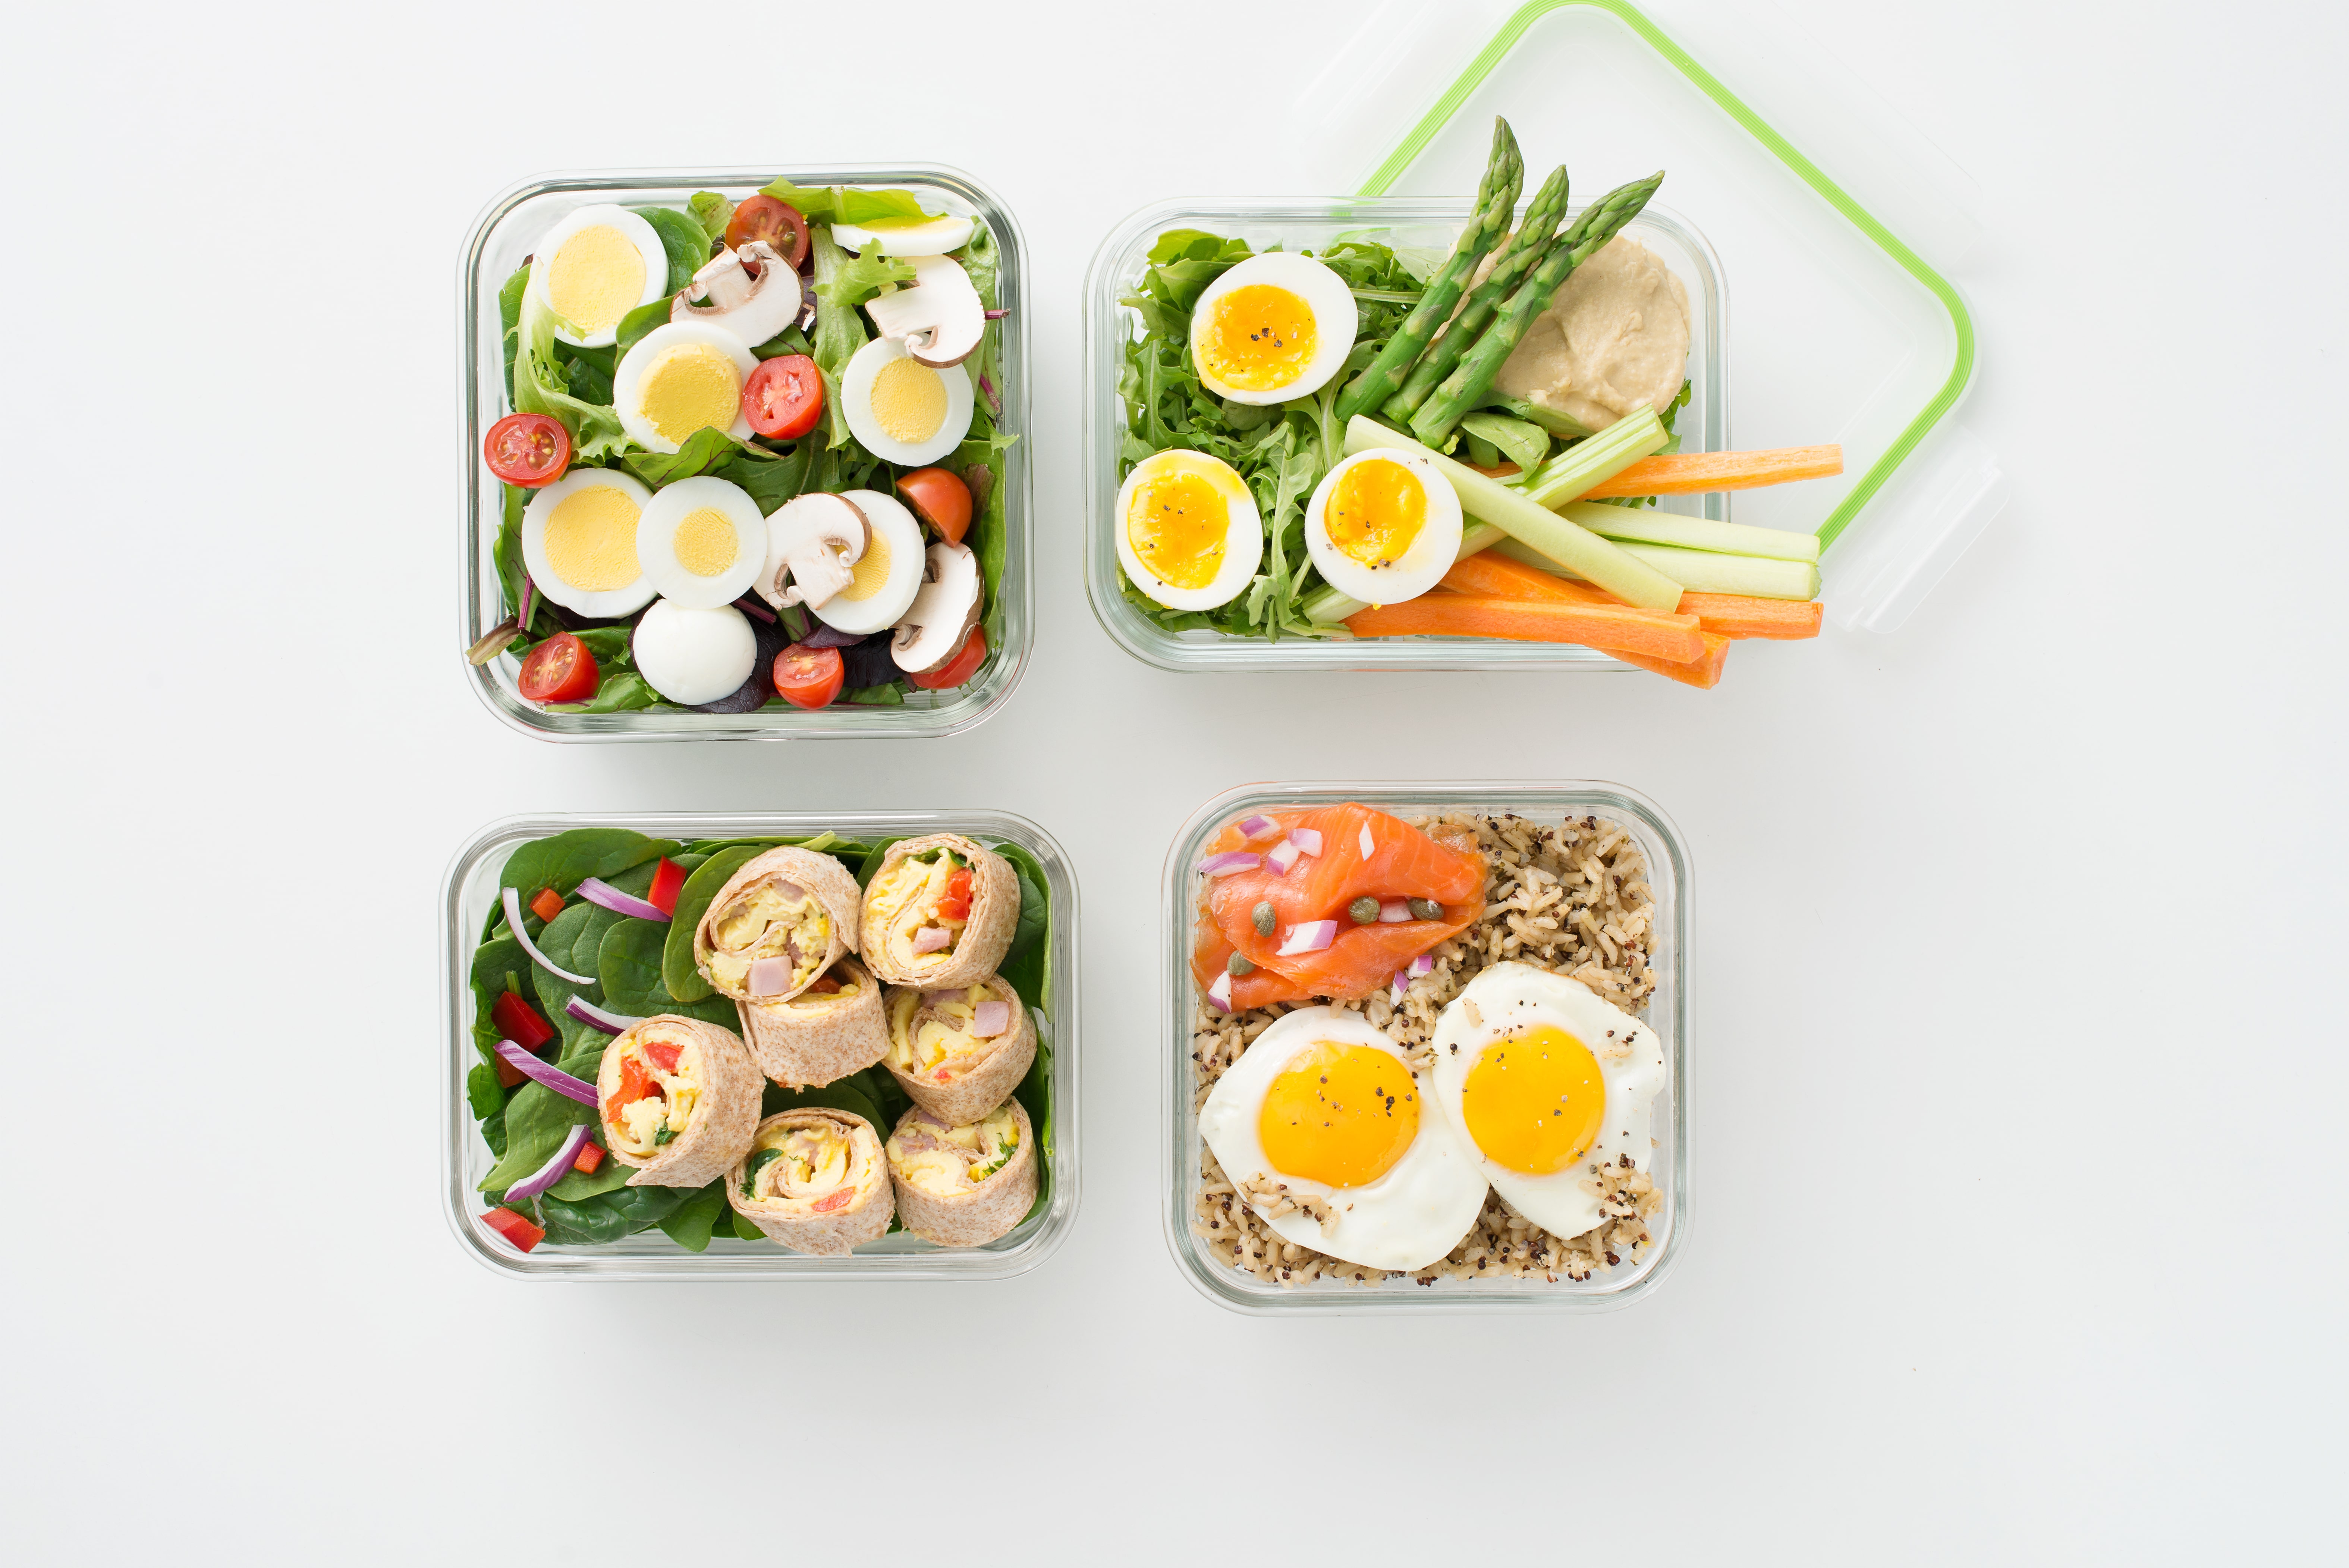 Meal Prep Tips to Help You Start Meal Prepping This Week